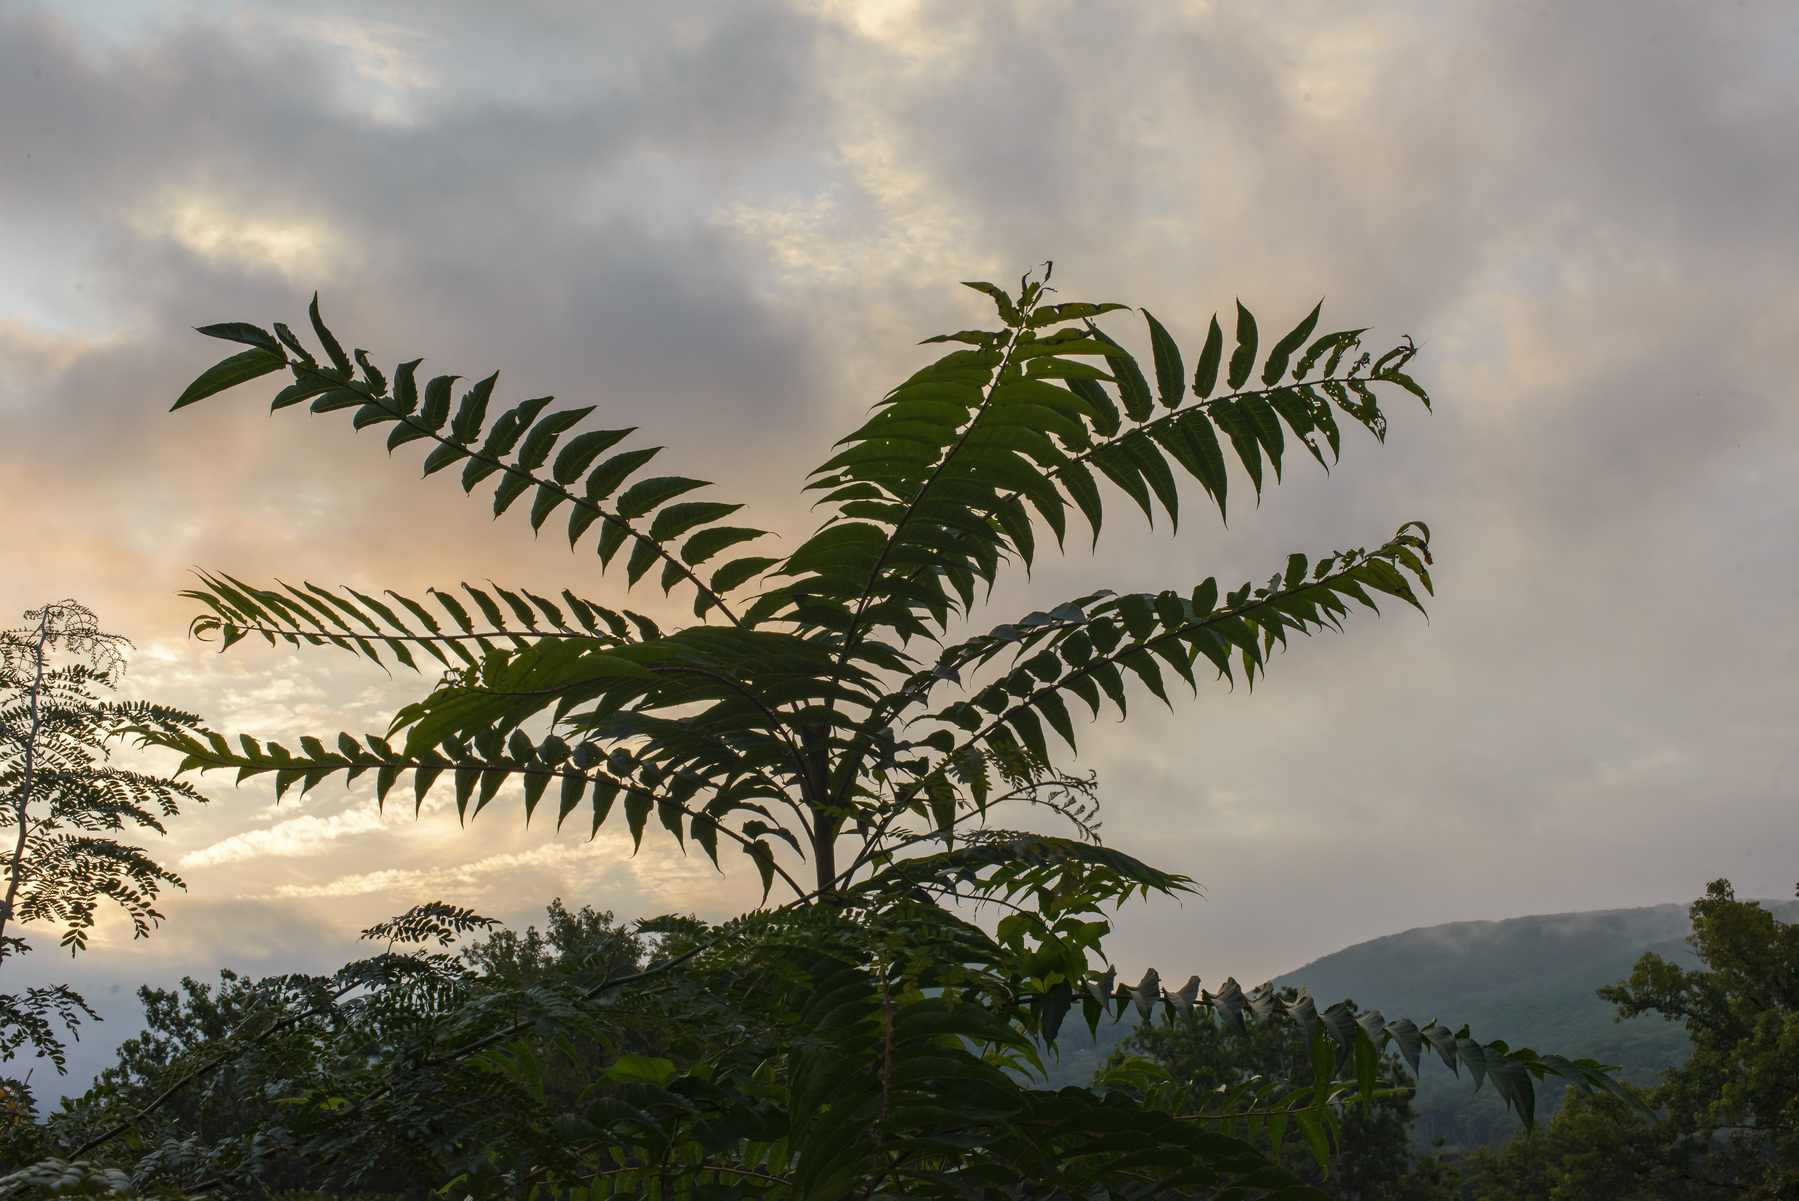 Landscape with “tree of heaven” sapling in foreground, clouds and mountain in background.